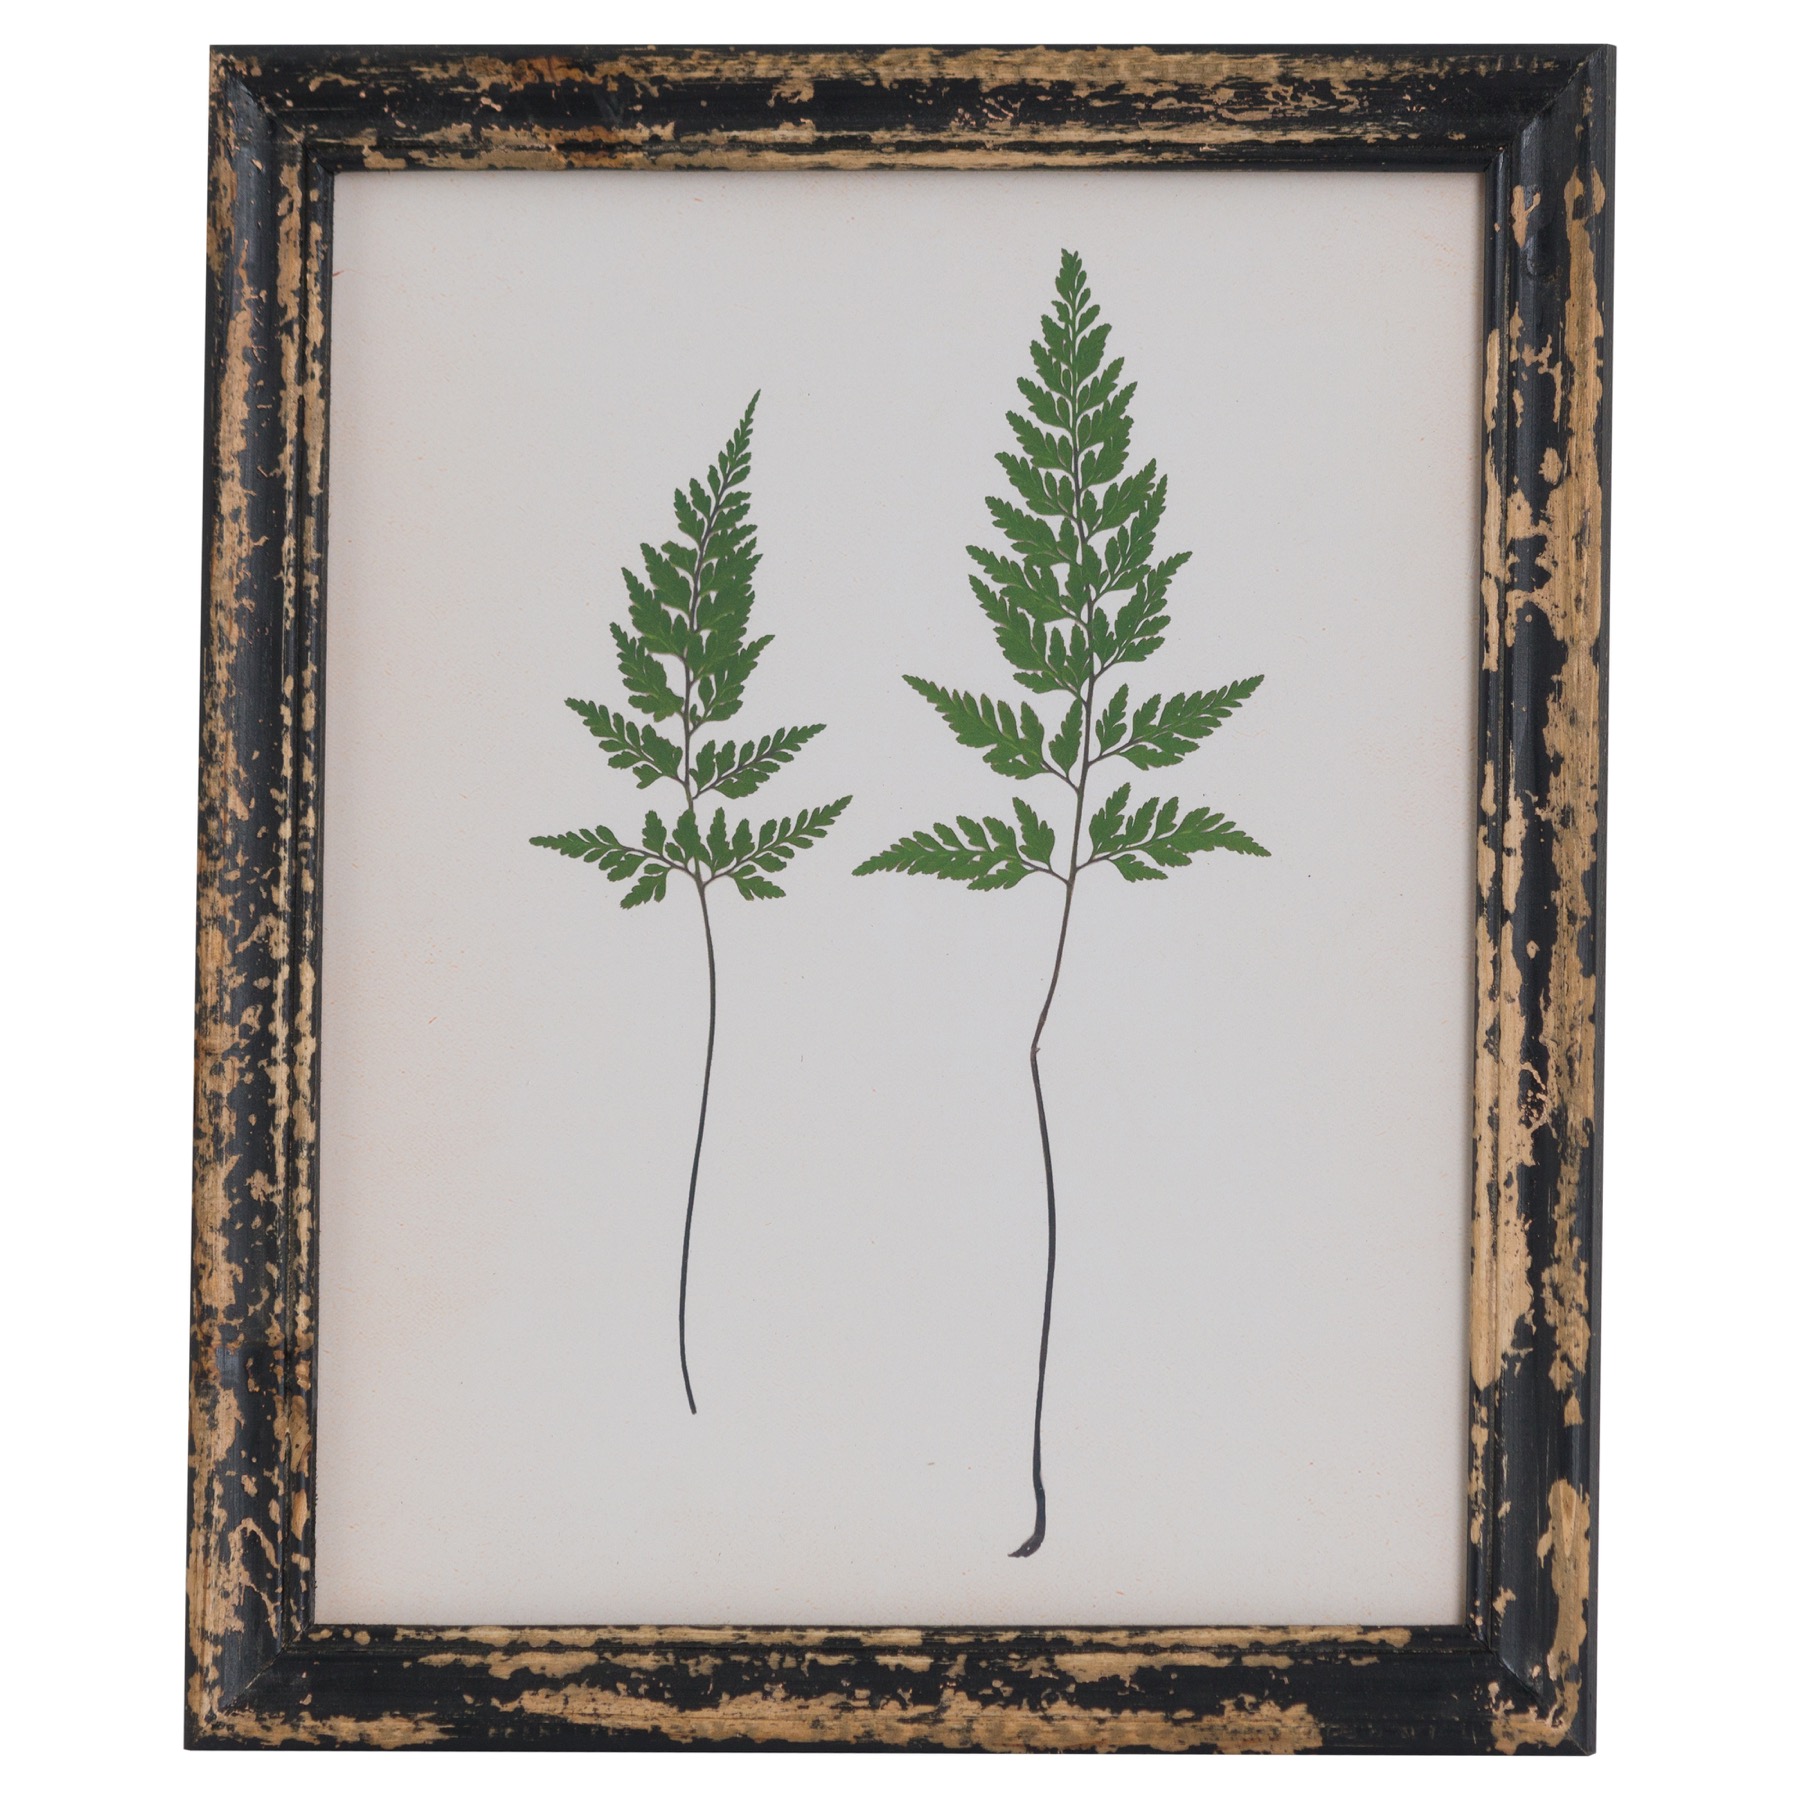 Rustic Framed Botanical Pair Of Ferns Picture - Image 1